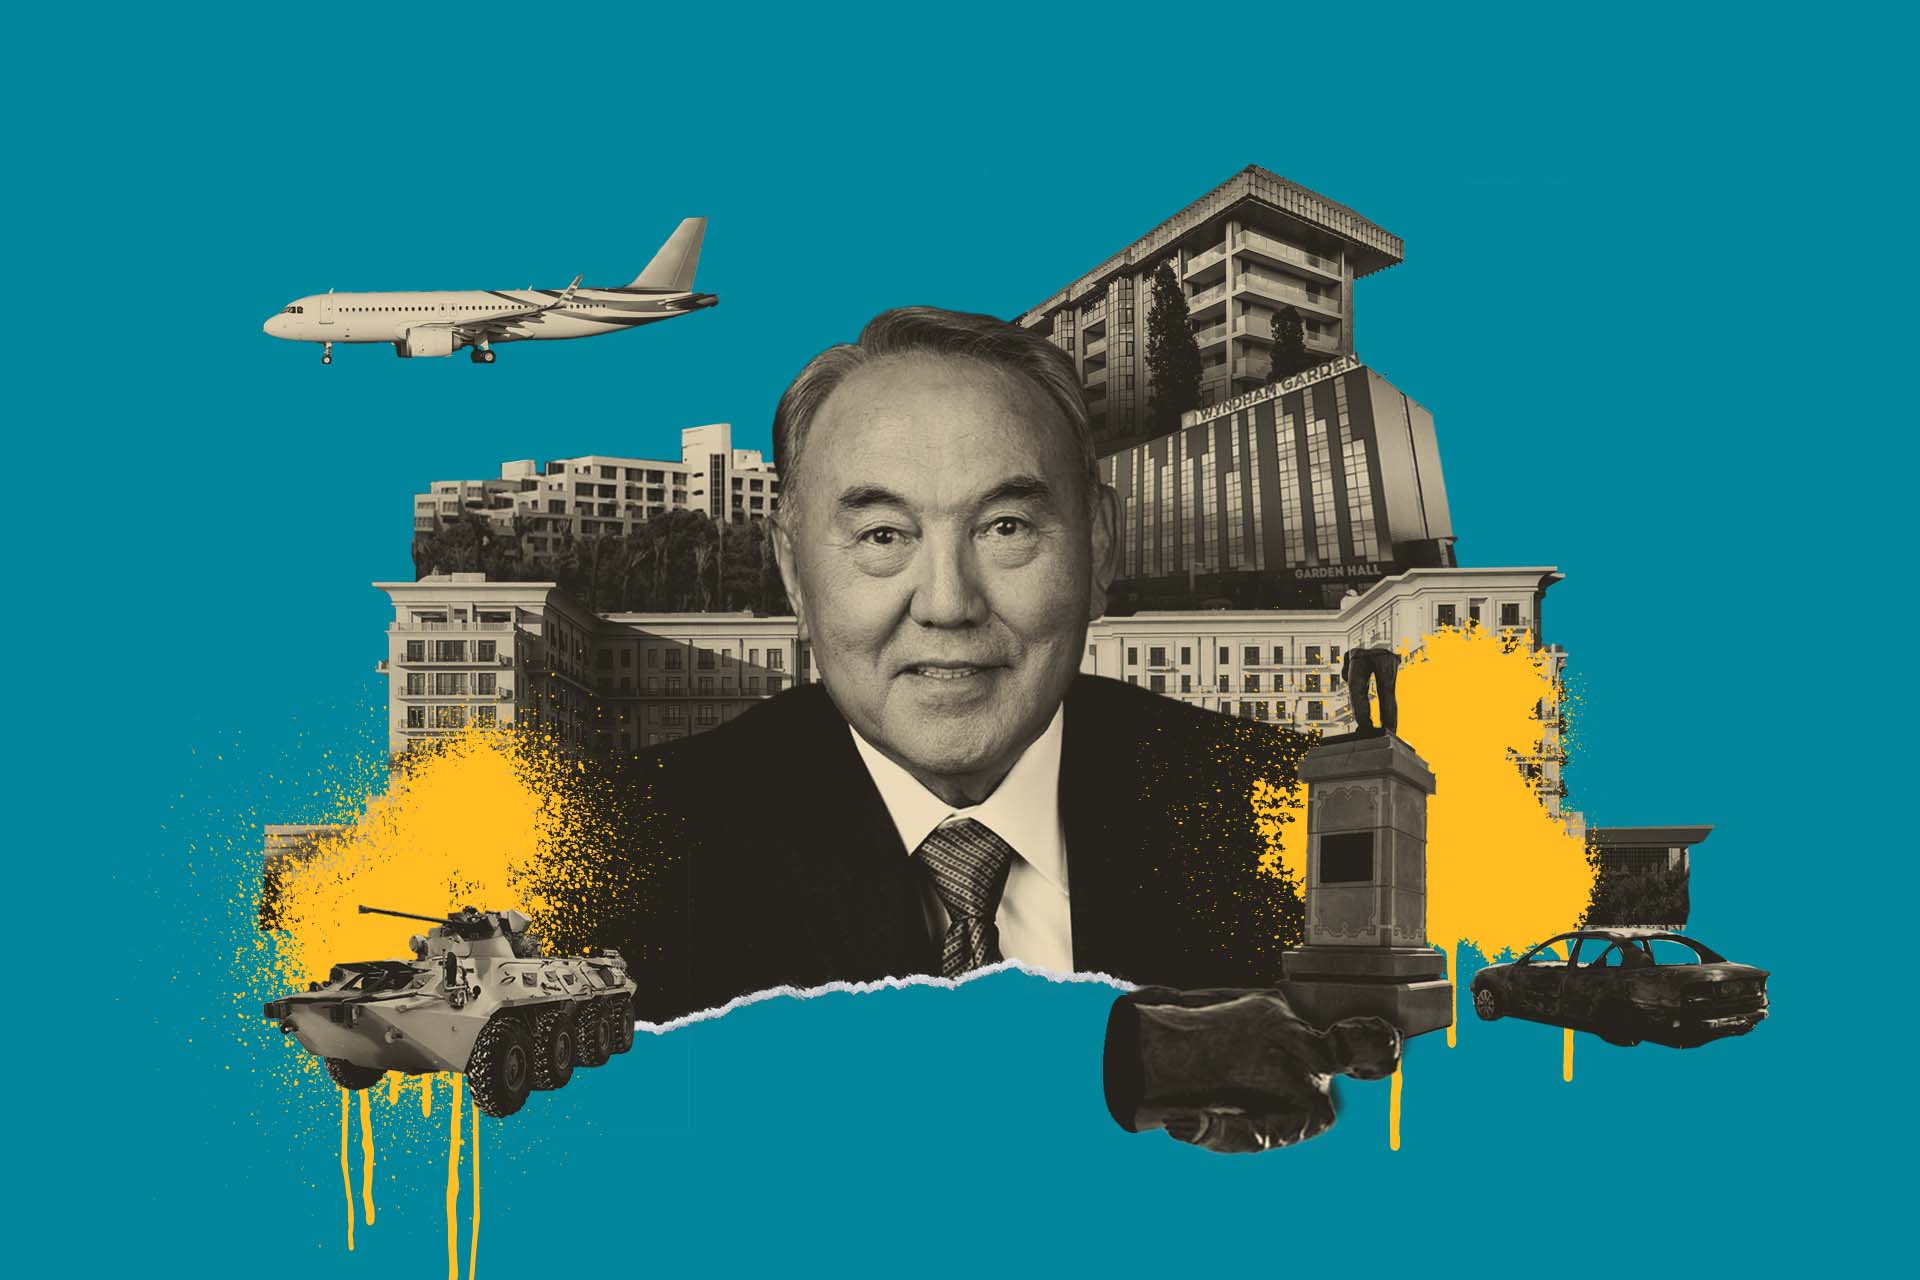 The Nazarbayev Billions: How Kazakhstan’s ‘Leader of the Nation’ Controls Vast Assets Through Charitable Foundations